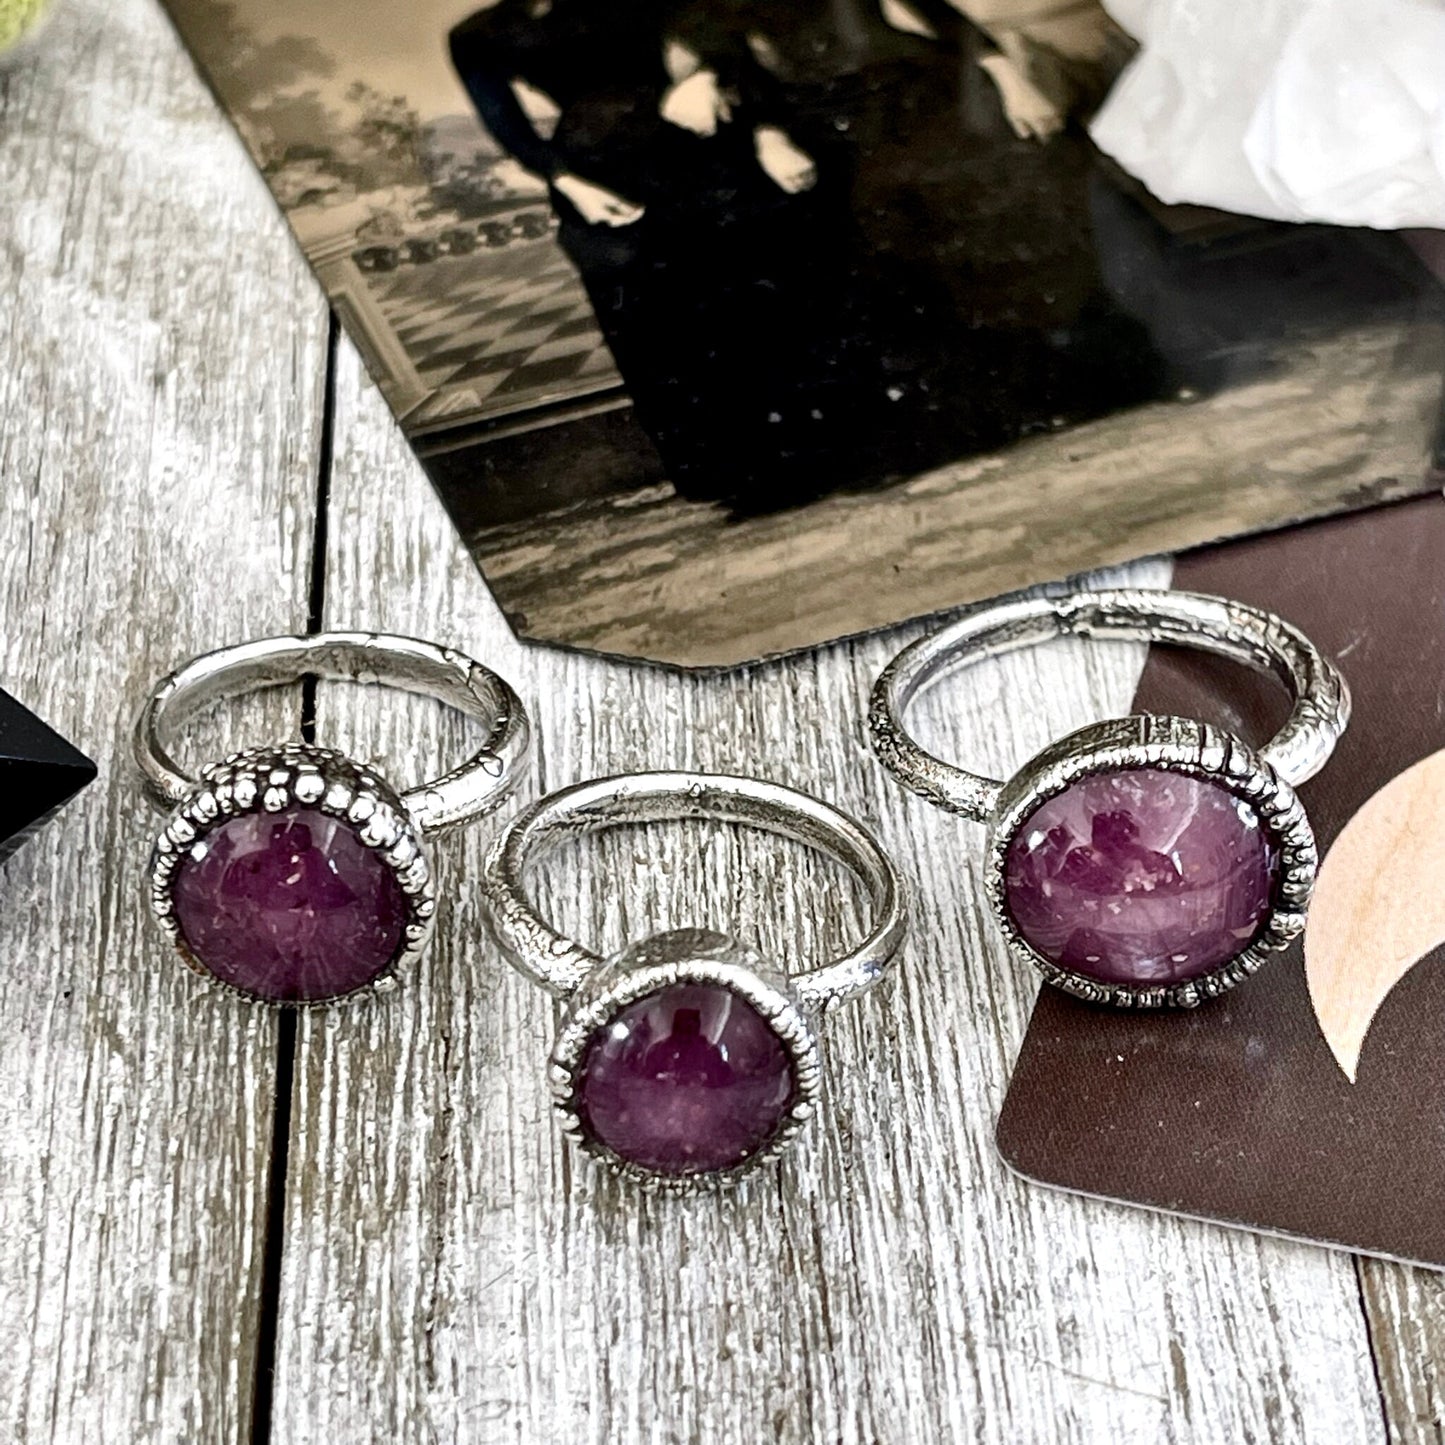 Star Ruby Stone Statement Ring Set in Fine Silver/ Crystal Ring Gift for Woman Star Ruby Jewelry Big Stone Ring - Foxlark Crystal Jewelry